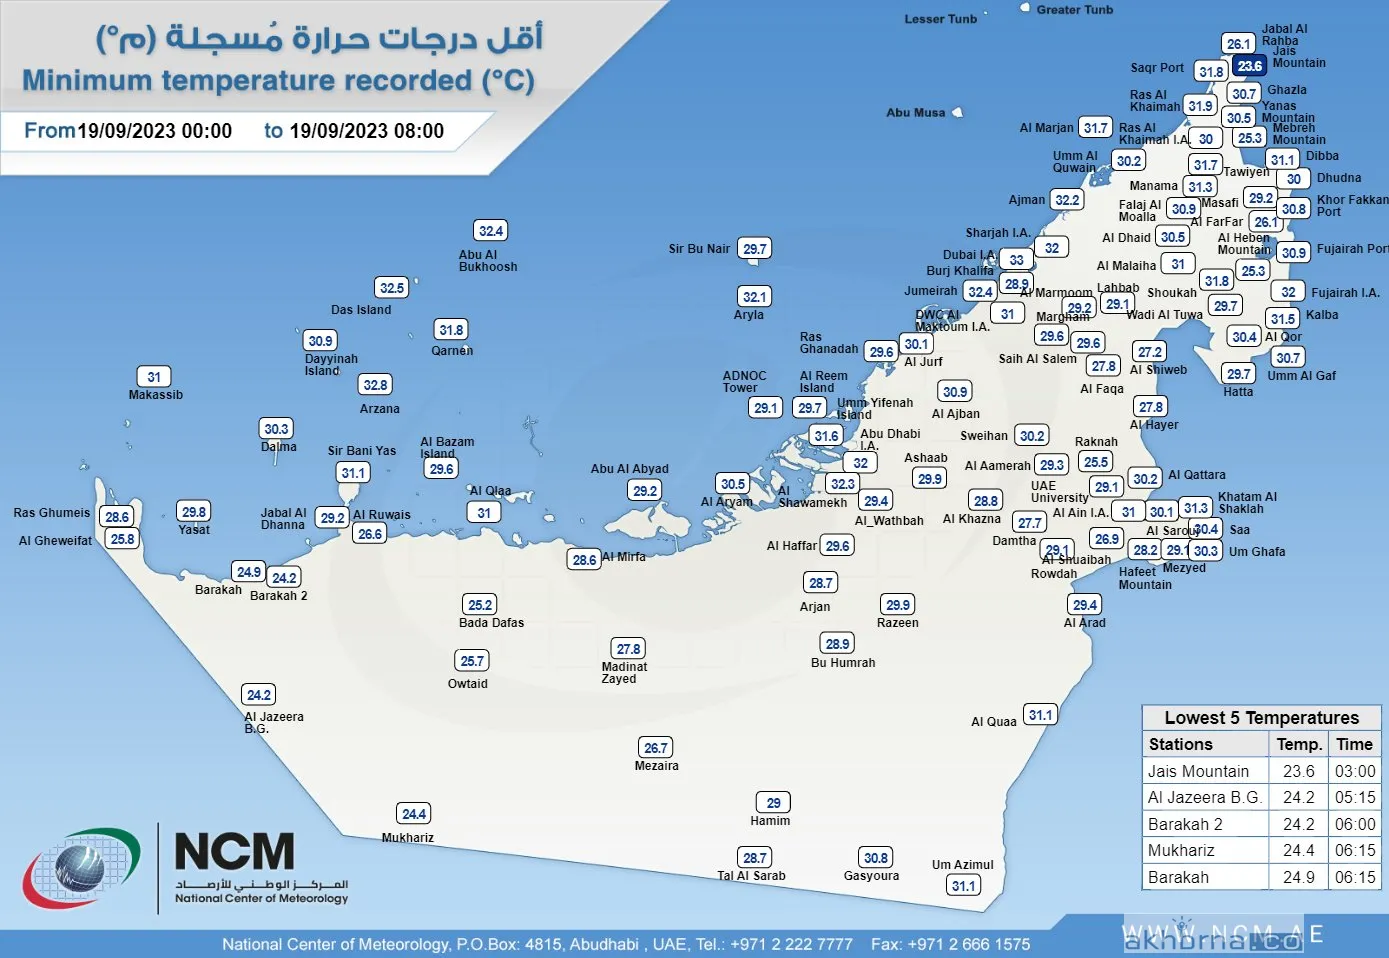 #The_lowest_temperature   recorded over the country today morning is 23.6°C in Jais Mountain (Ras Al Khaimah) at 03:00 UAE Local time.